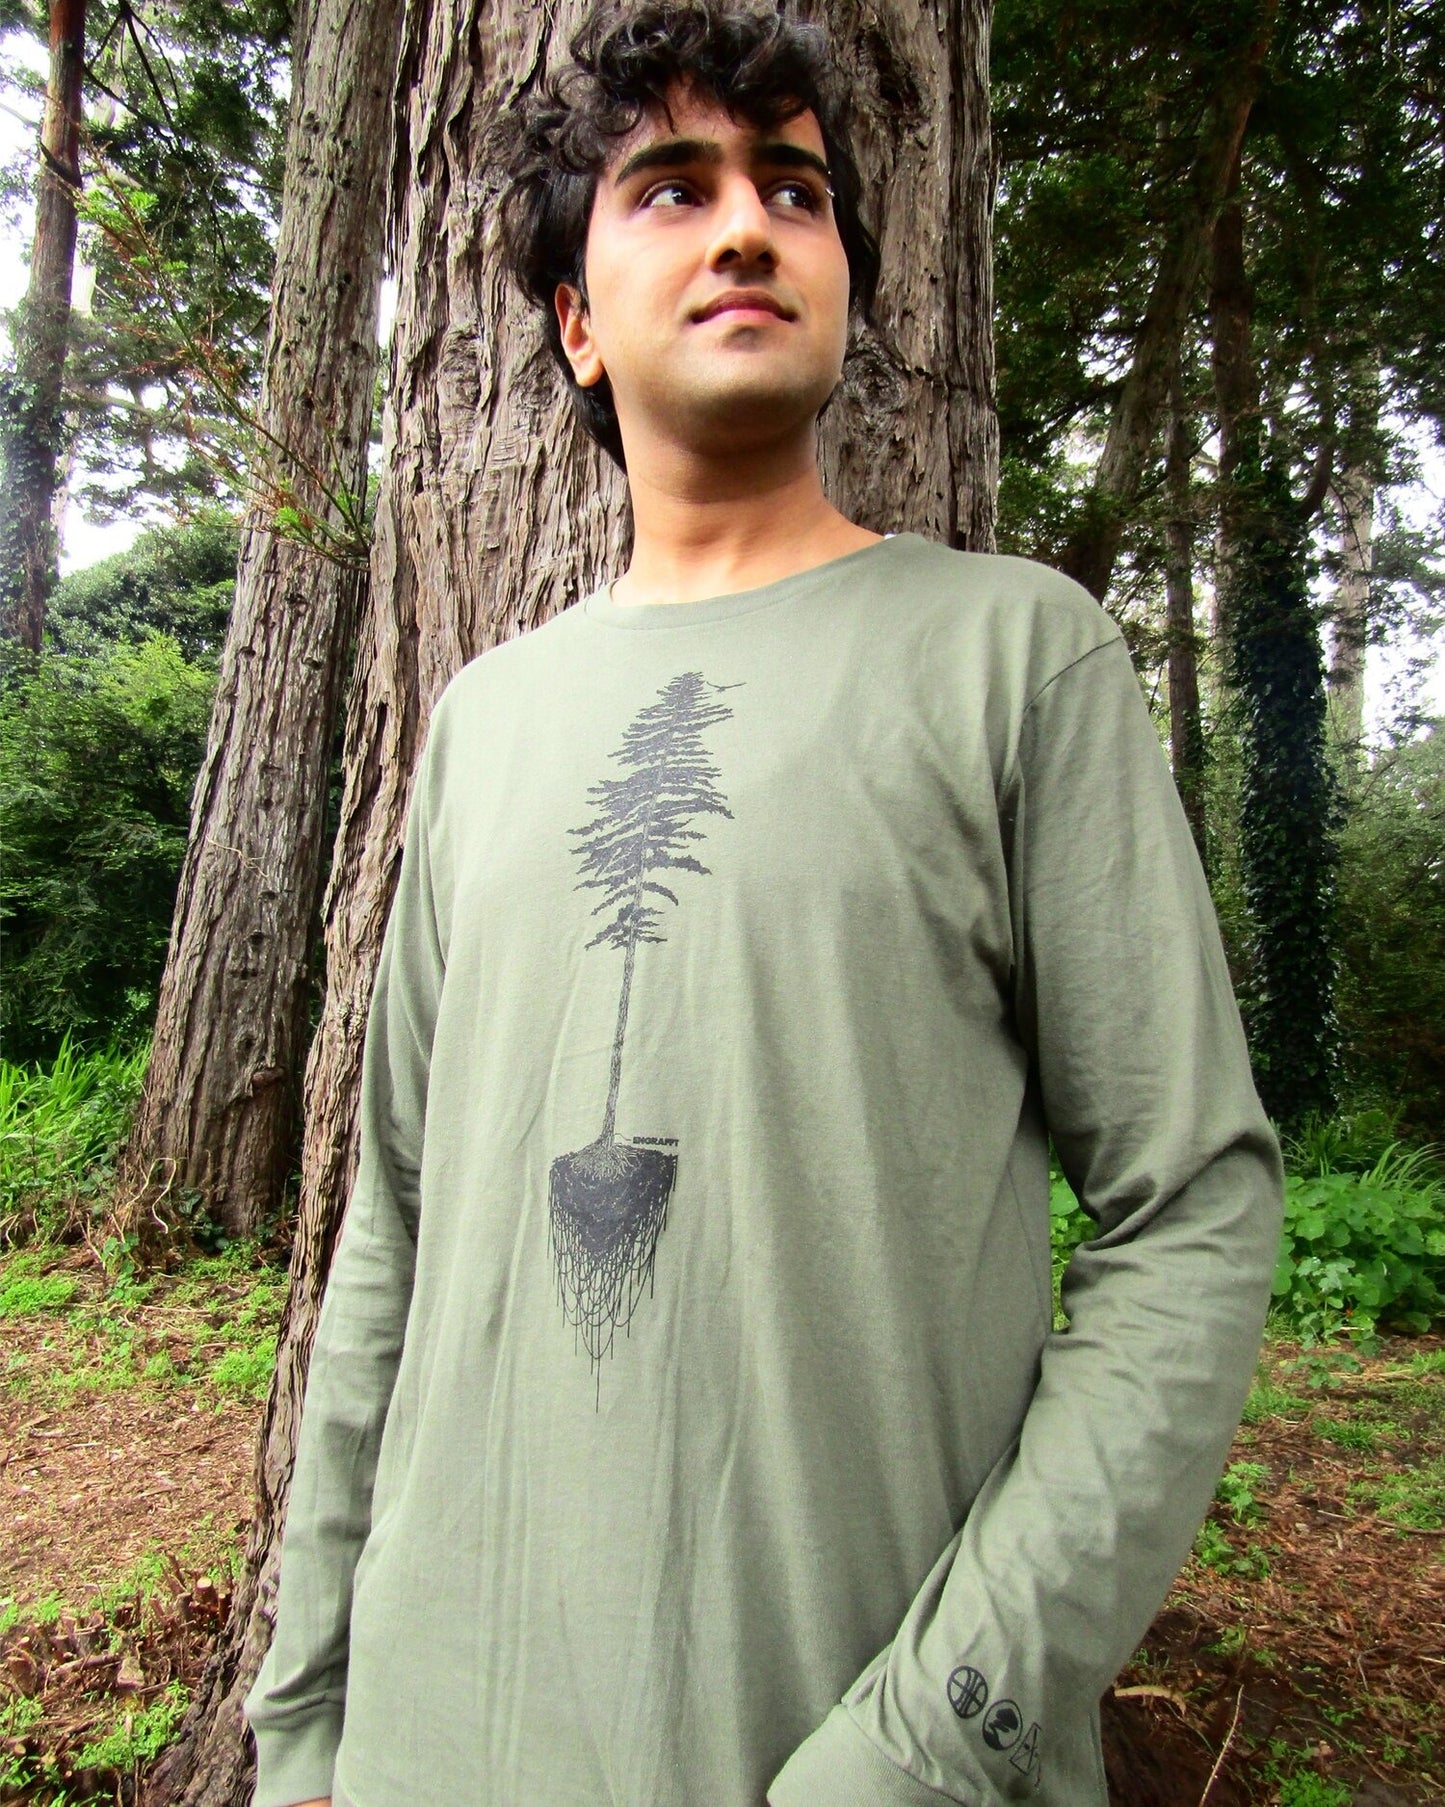 ENGRAFFT - The Grafted Redwood L/S Tee